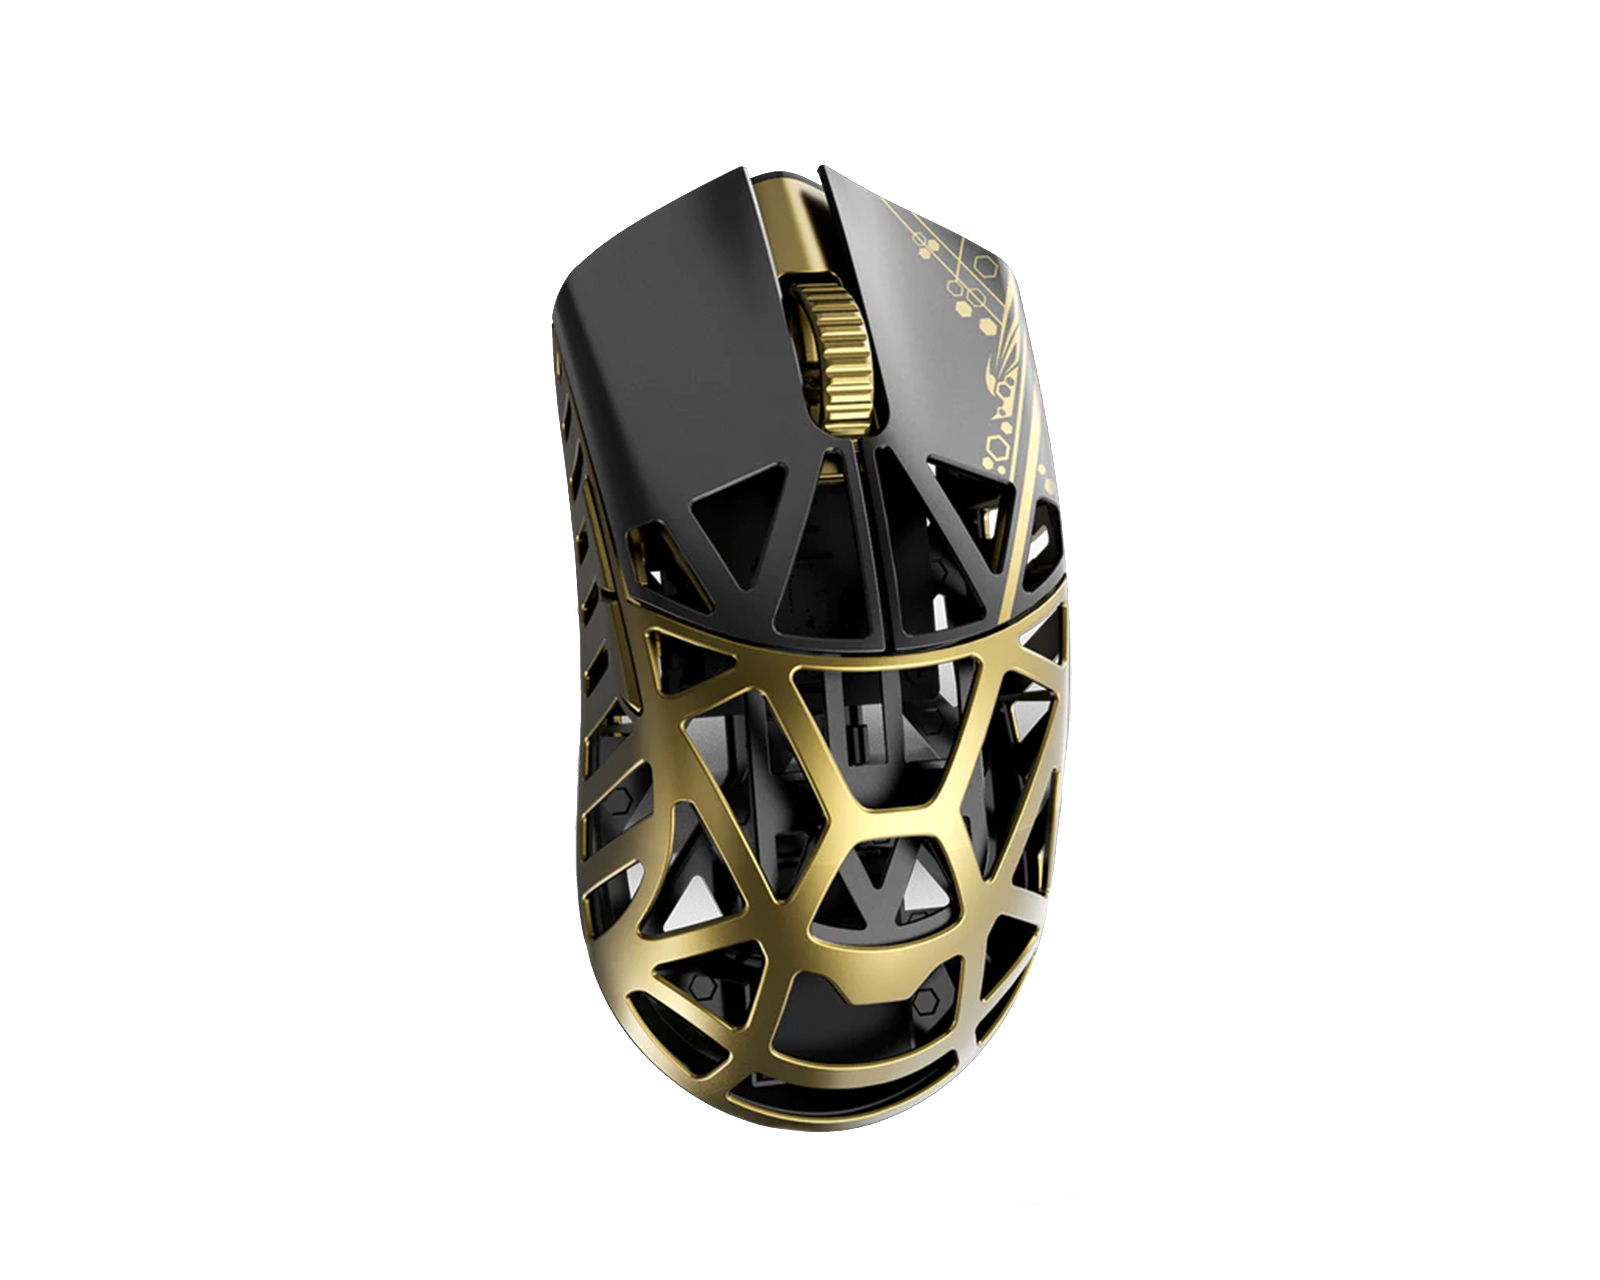 WLMouse BEAST X Wireless Gaming Mouse - Gold/Black - MaxGaming.com